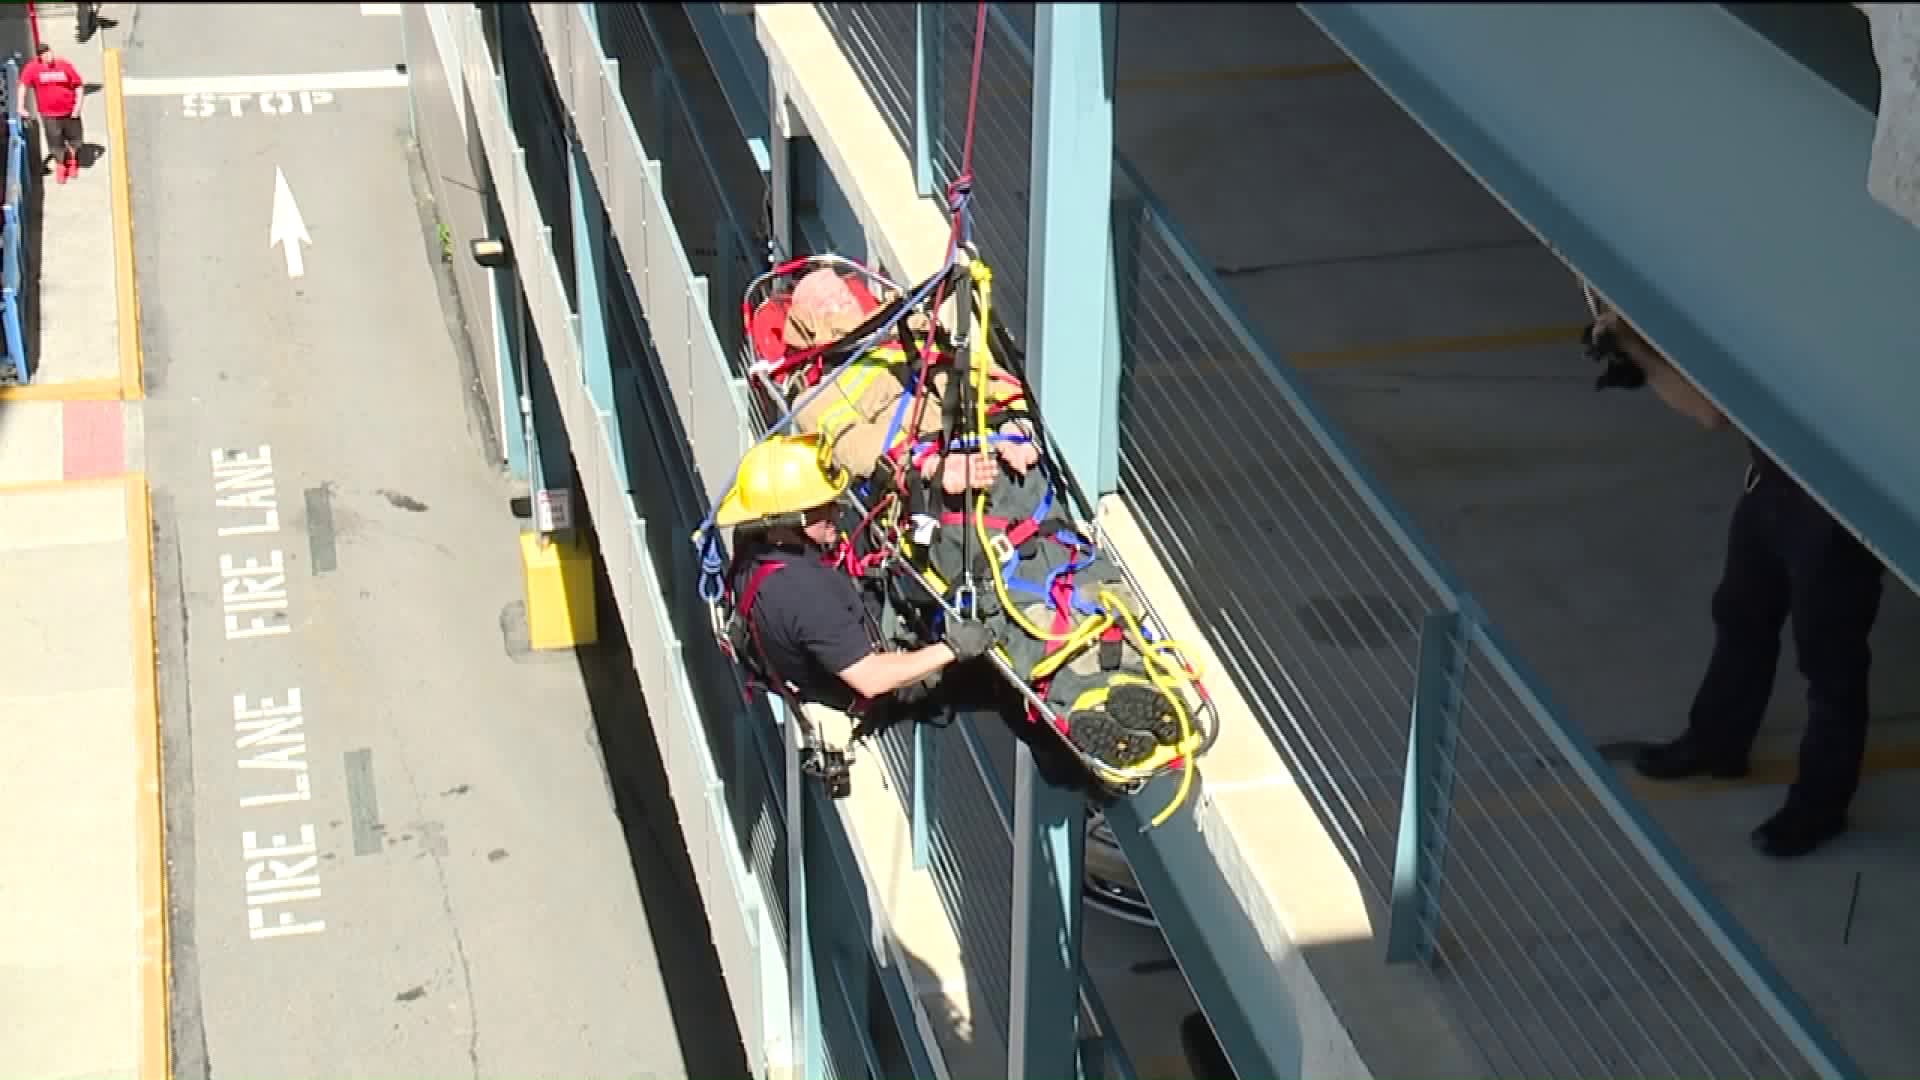 Firefighters Practice Rescue Training in Wilkes-Barre